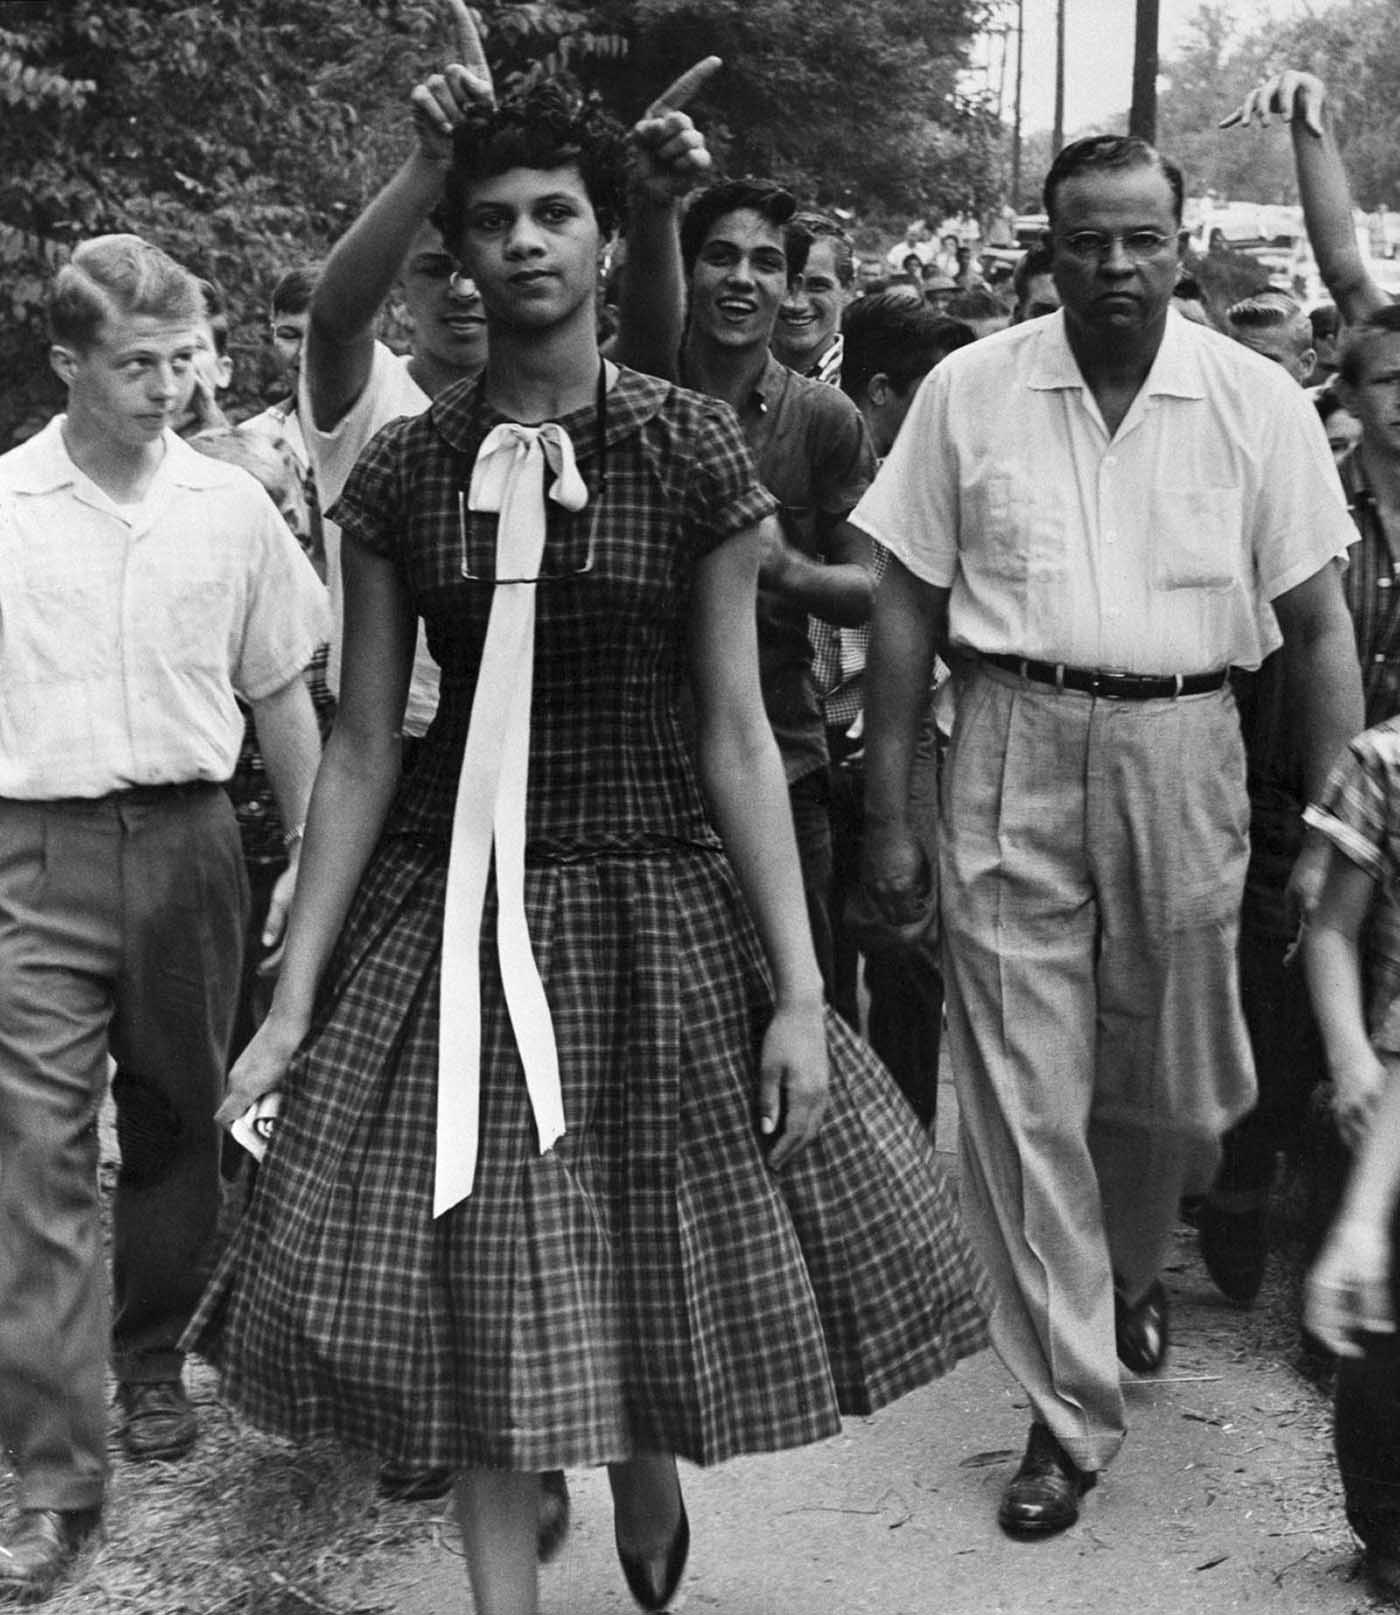 Dorothy Counts: The Story of Brave Teenager who Stood against the Segregation in the U.S.